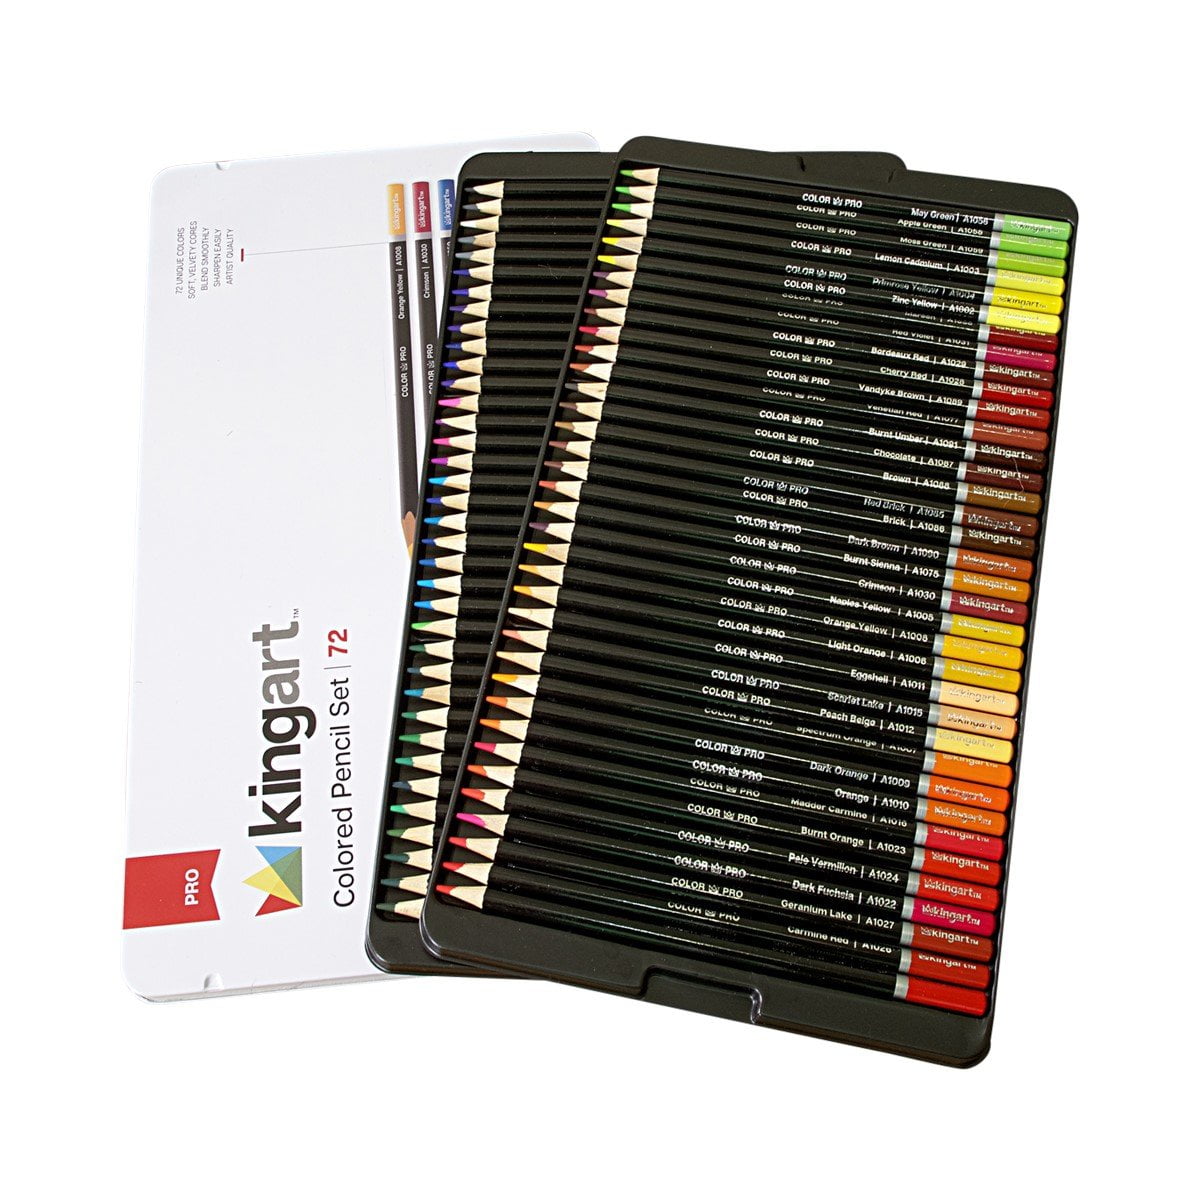 MARKART 72 Premium Colored Pencils Set, Ideal for Drawing Art Coloring Books Sketching Shading, Artist Soft Series Lead Cores PE, Metal